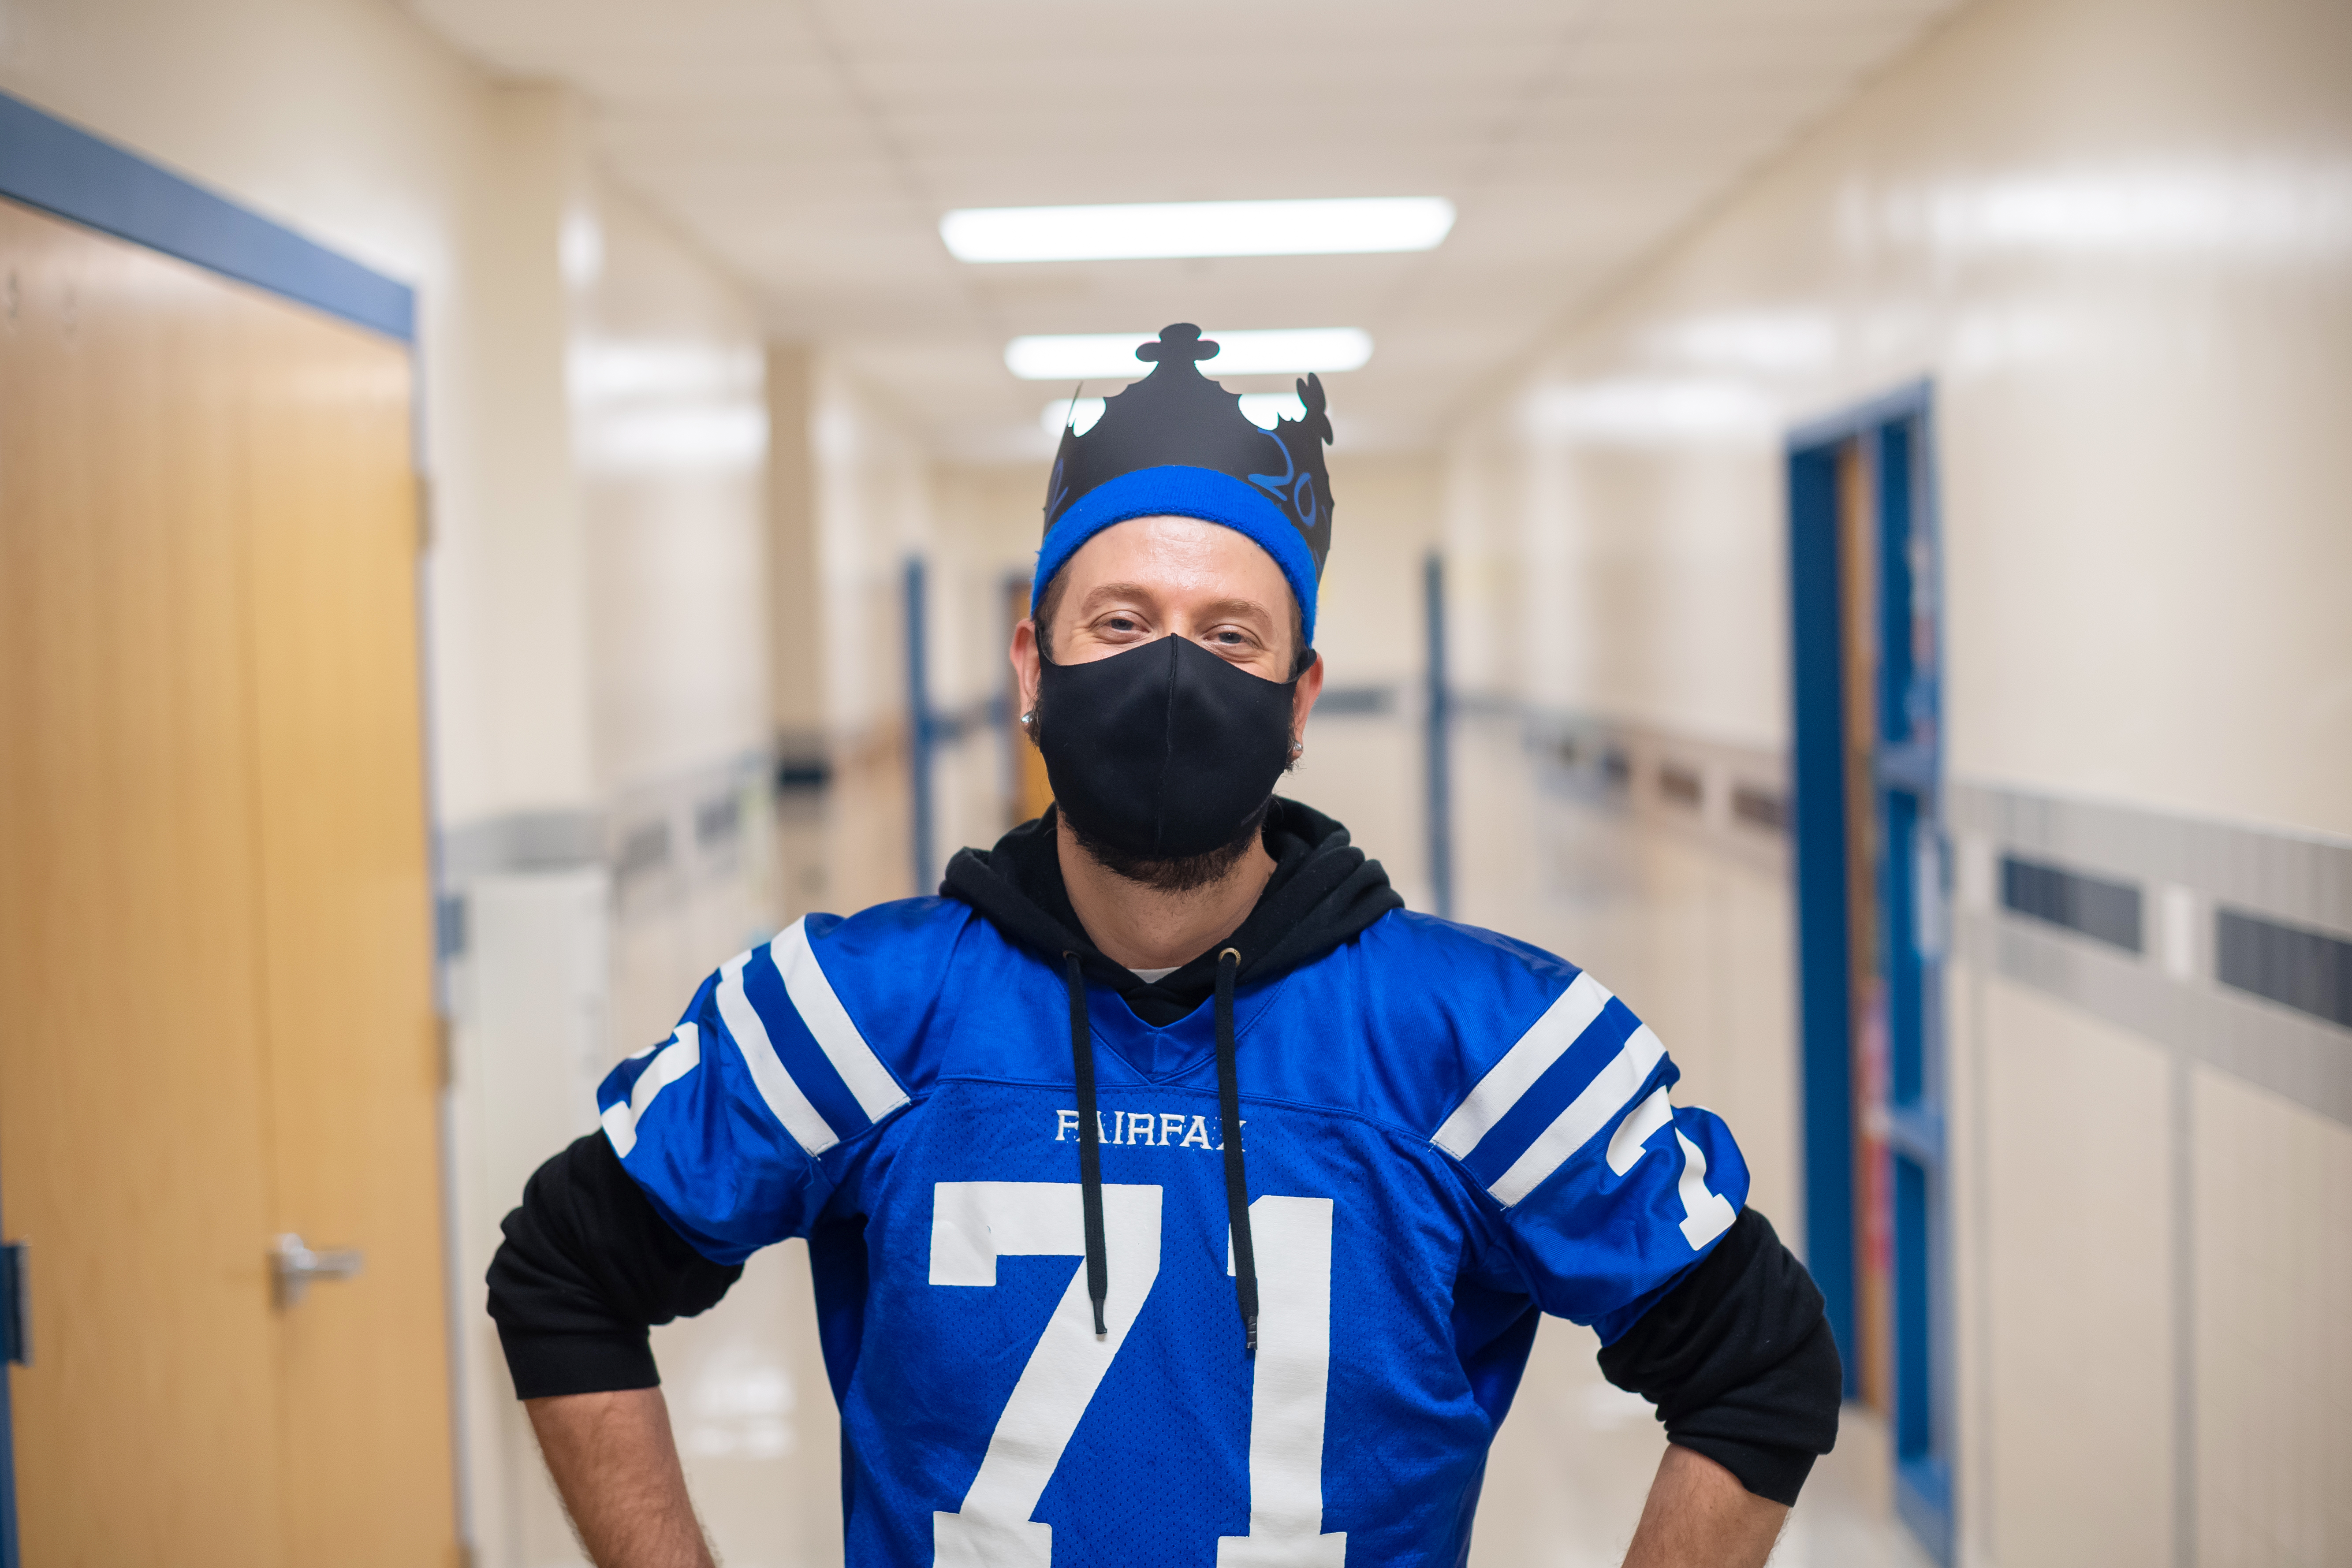 Fairfax eSports faculty adviser David Greene, a ninth grade English teacher by day, poses for a picture in a school jersey.